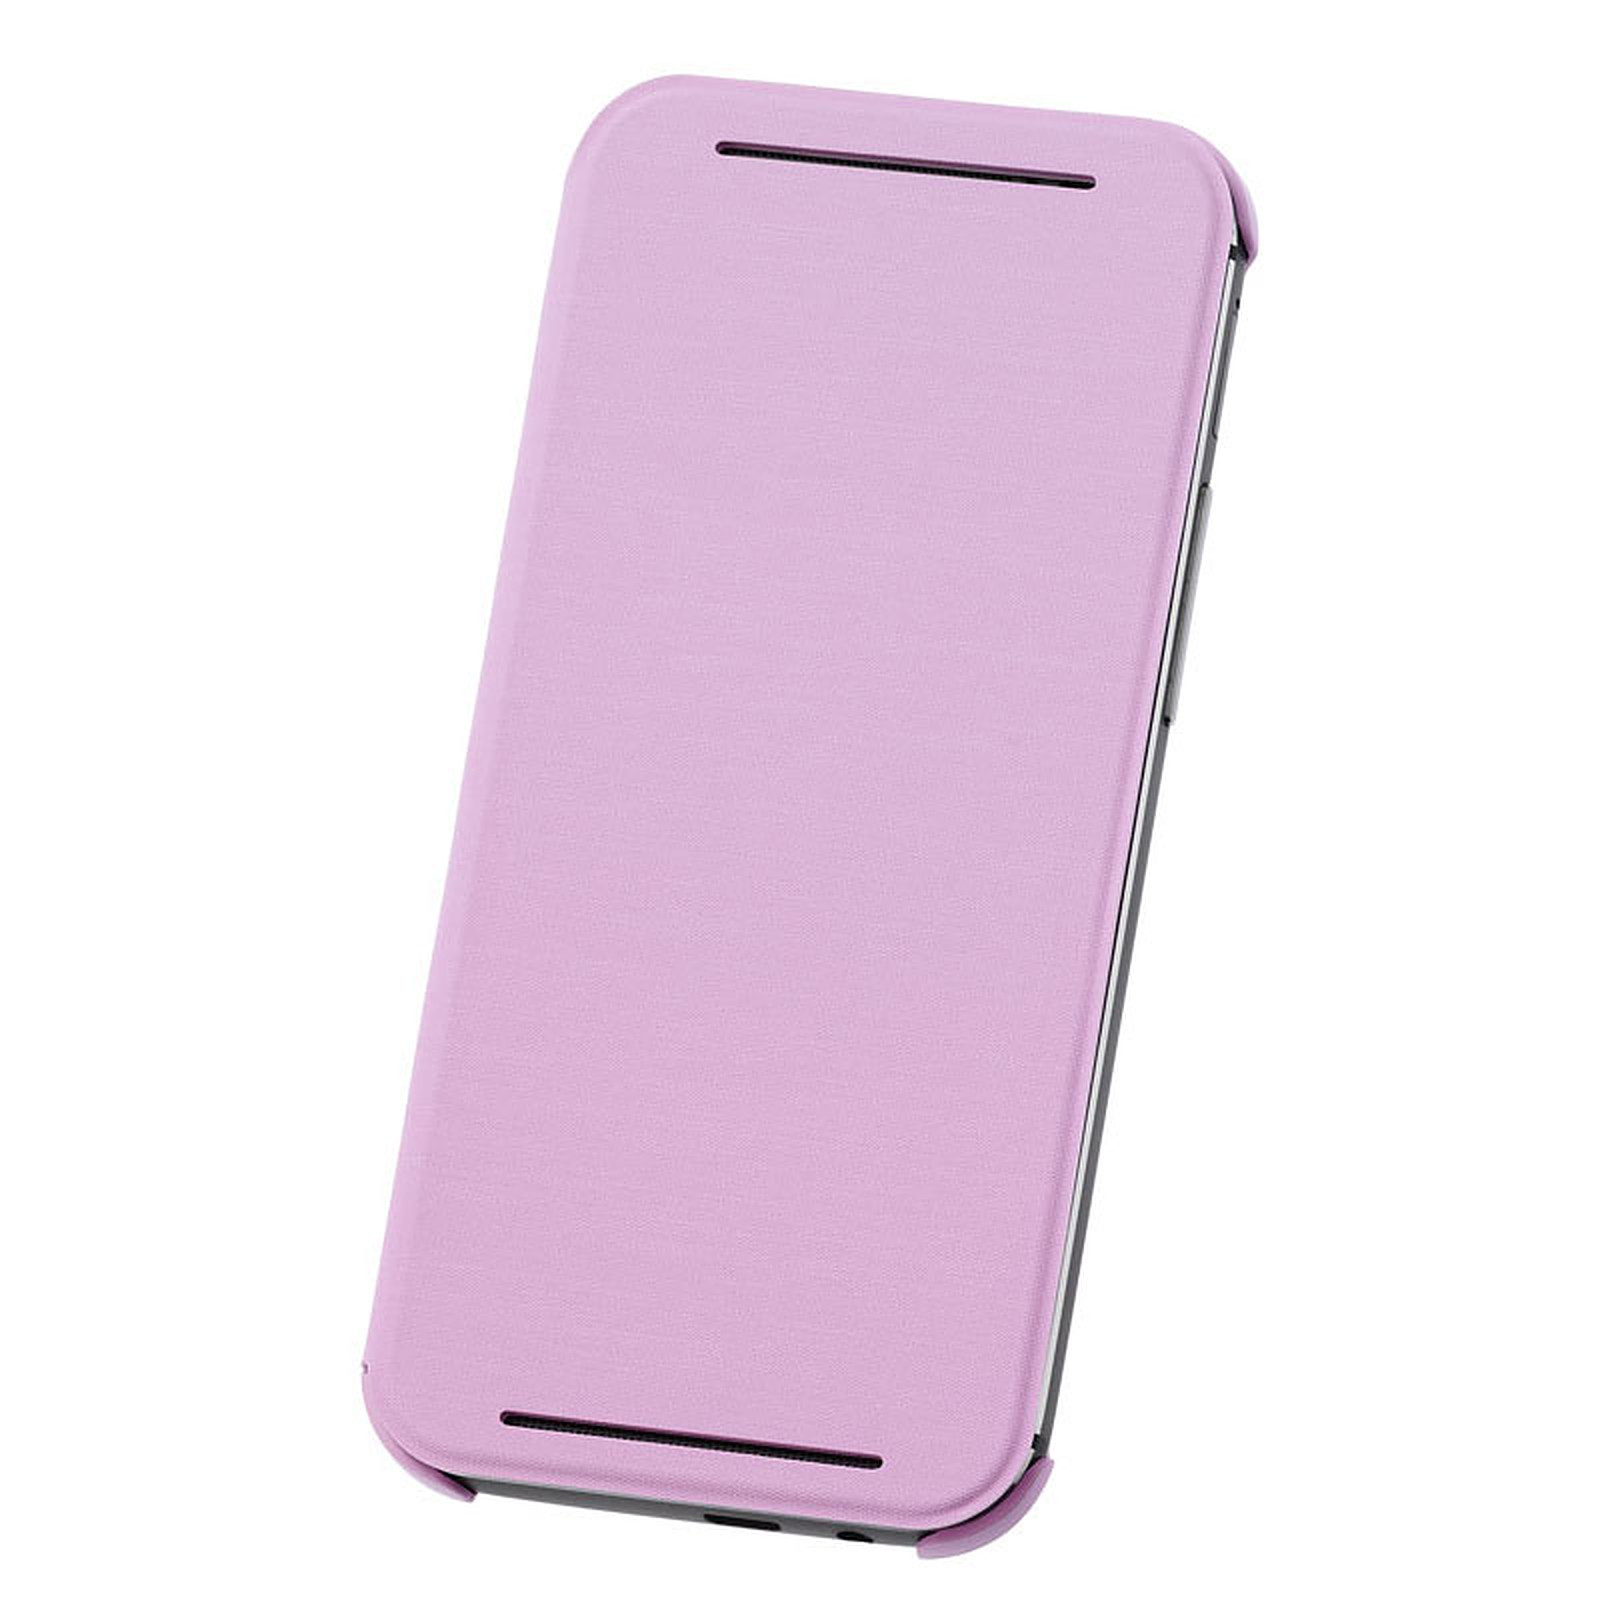 HTC Coque a  Rabat Double Dip HC V941 Rose HTC One M8 - Coque telephone HTC - Occasion